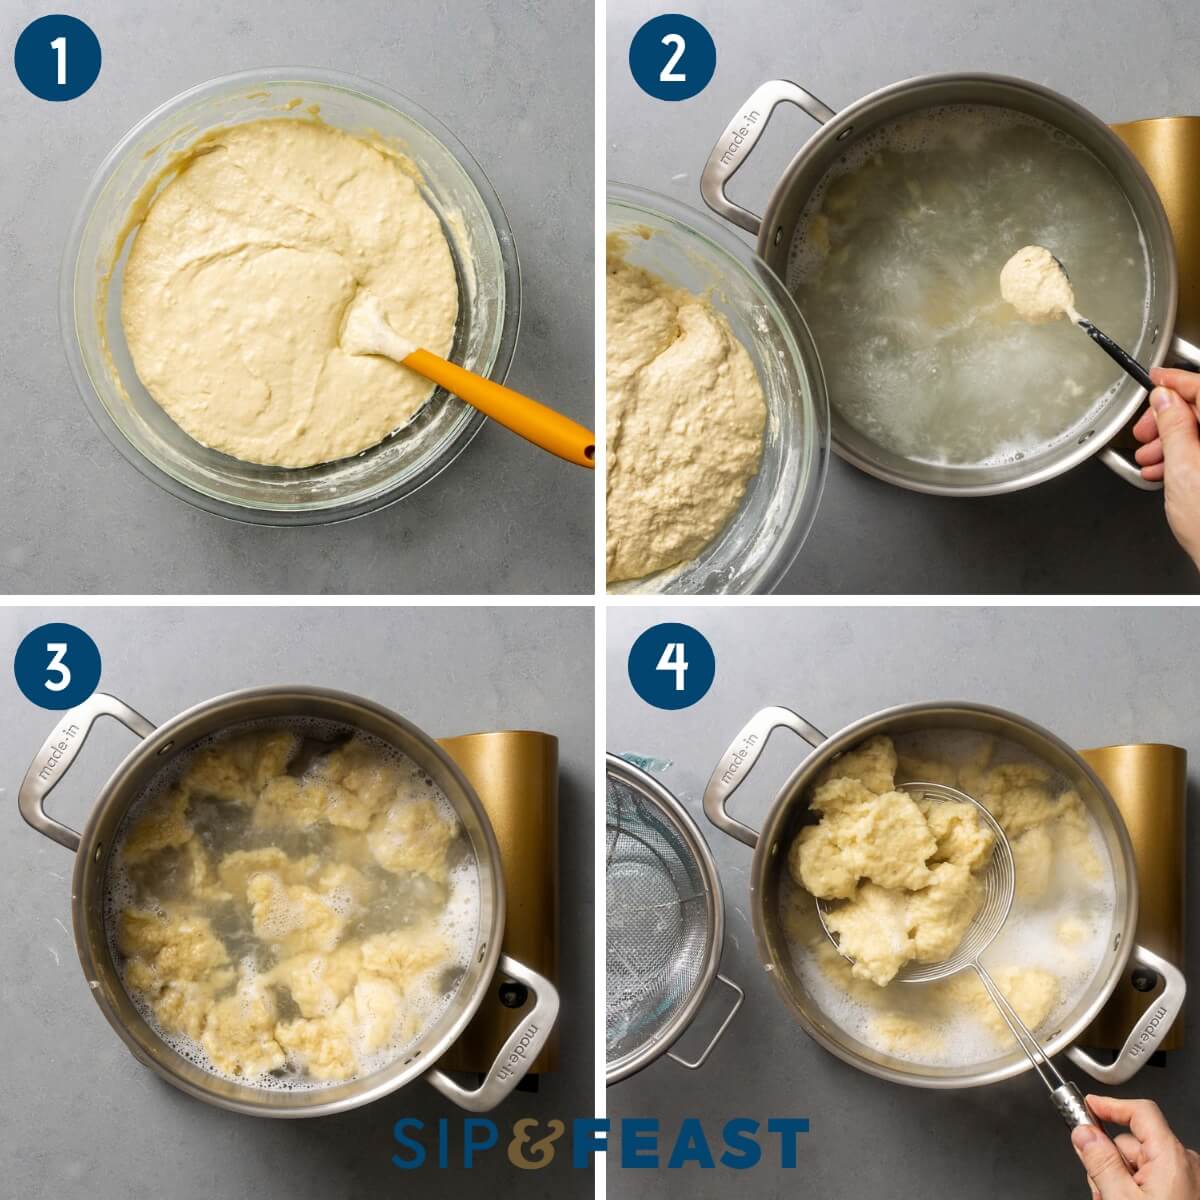 Dumplings process collage showing batter in bowl, boiling dumplings, and scooping out dumplings with strainer.